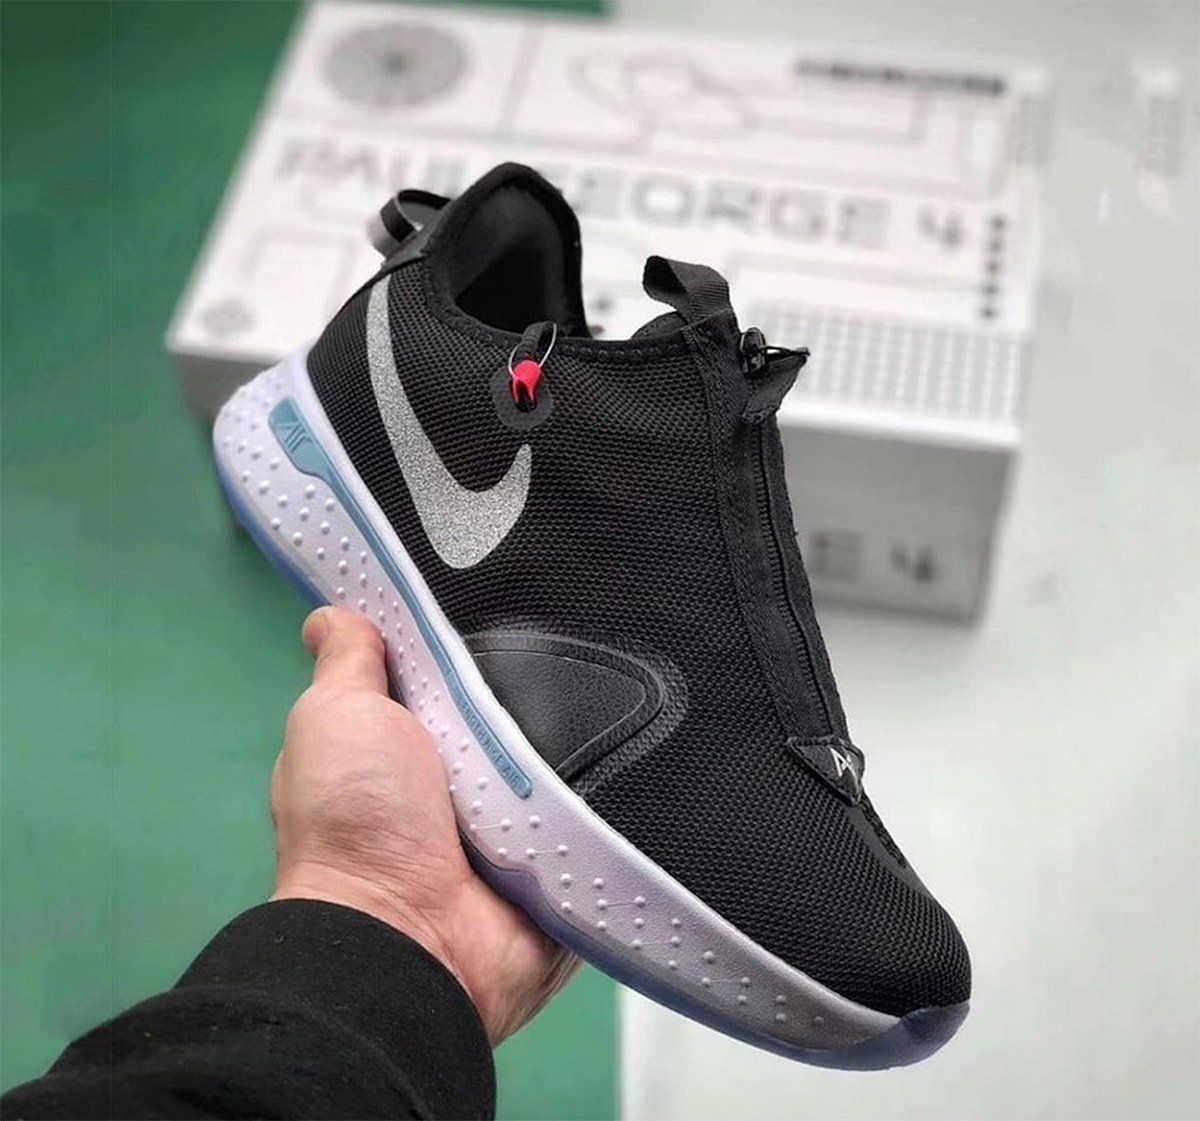 First Looks // Nike PG 4 - HOUSE OF 